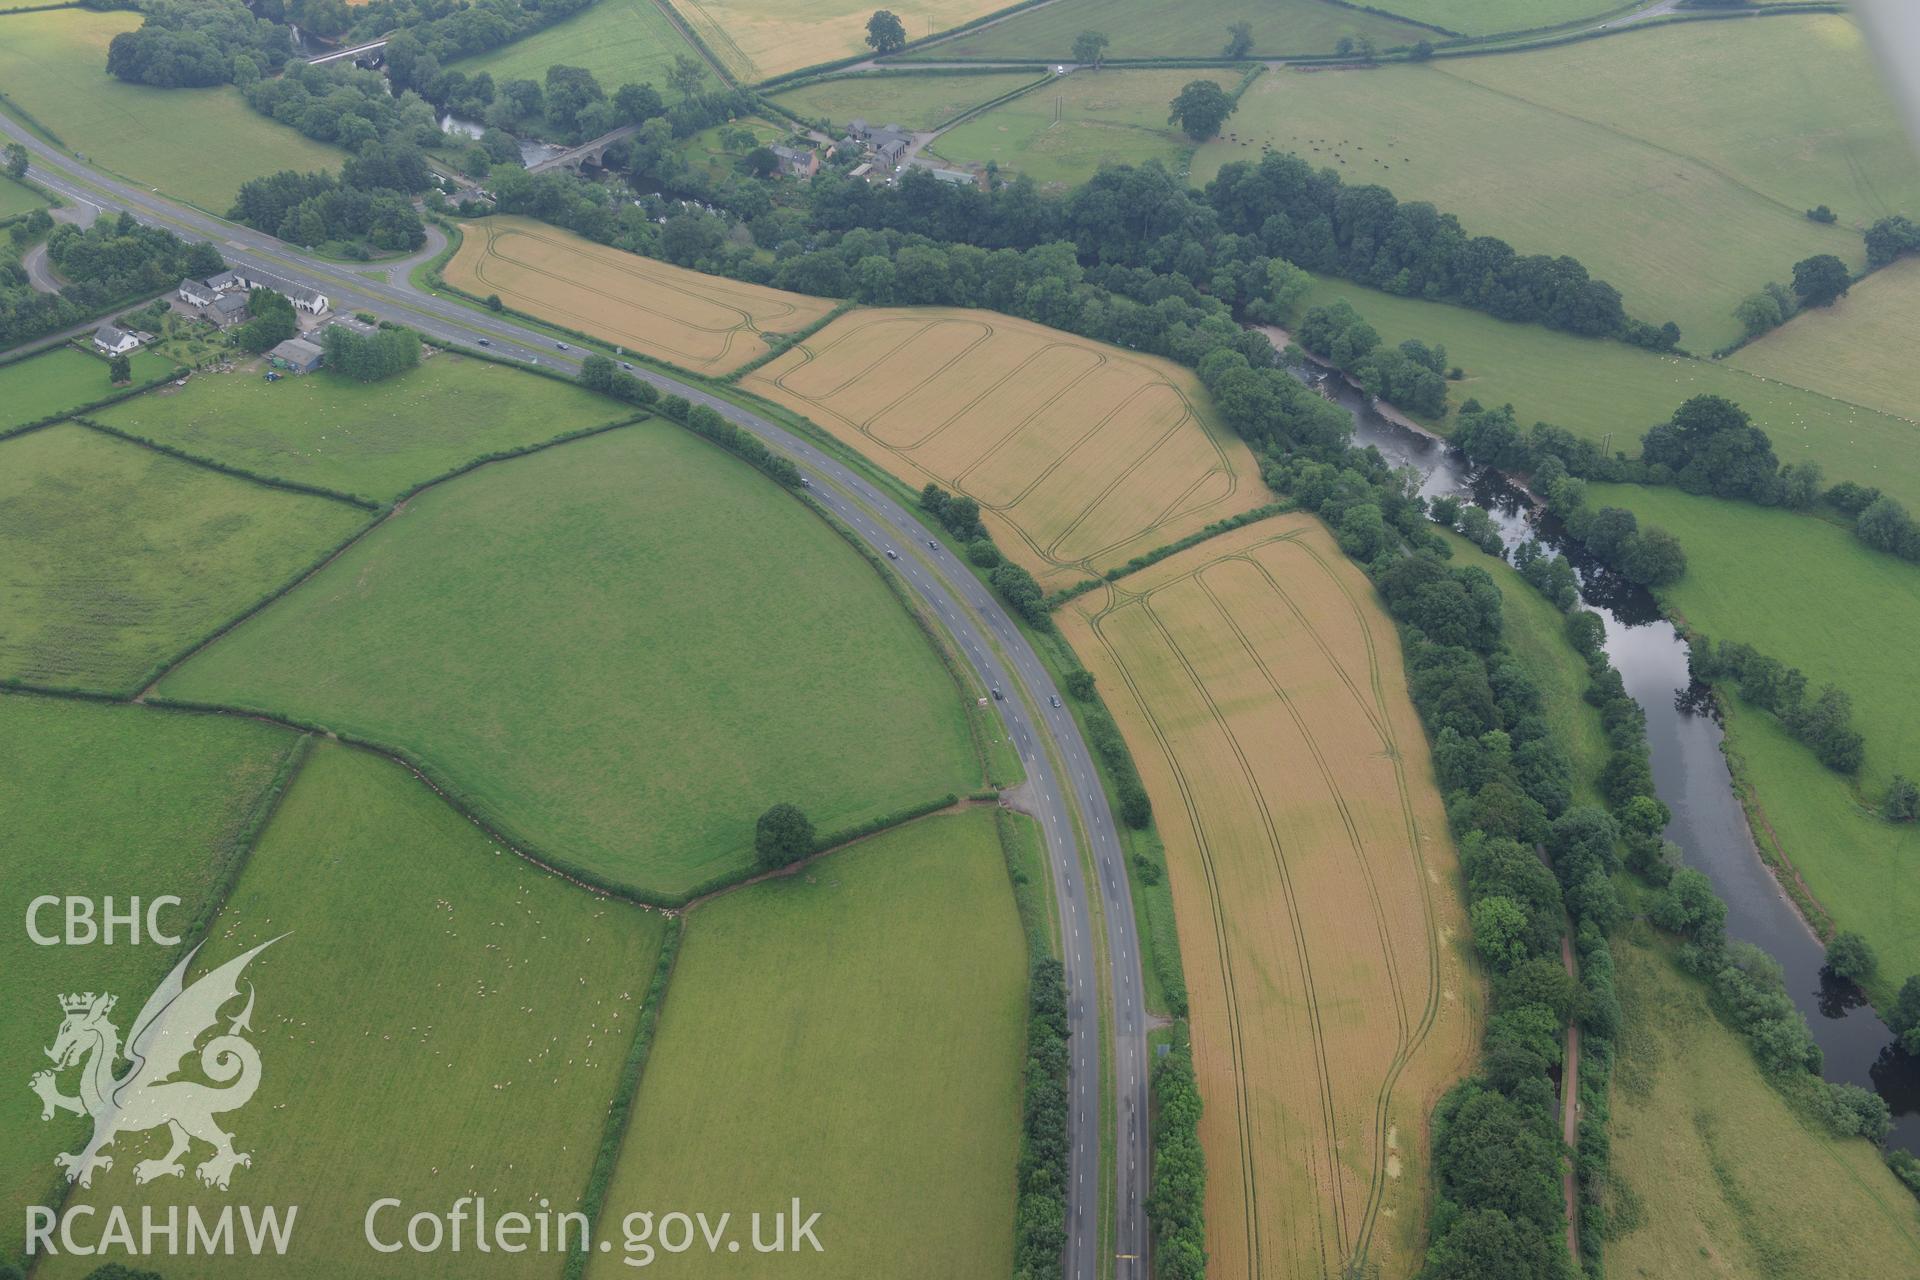 Cefn-brynich Roman fort, general view of cropmarks from west, taken by RCAHMW 1st August 2013.